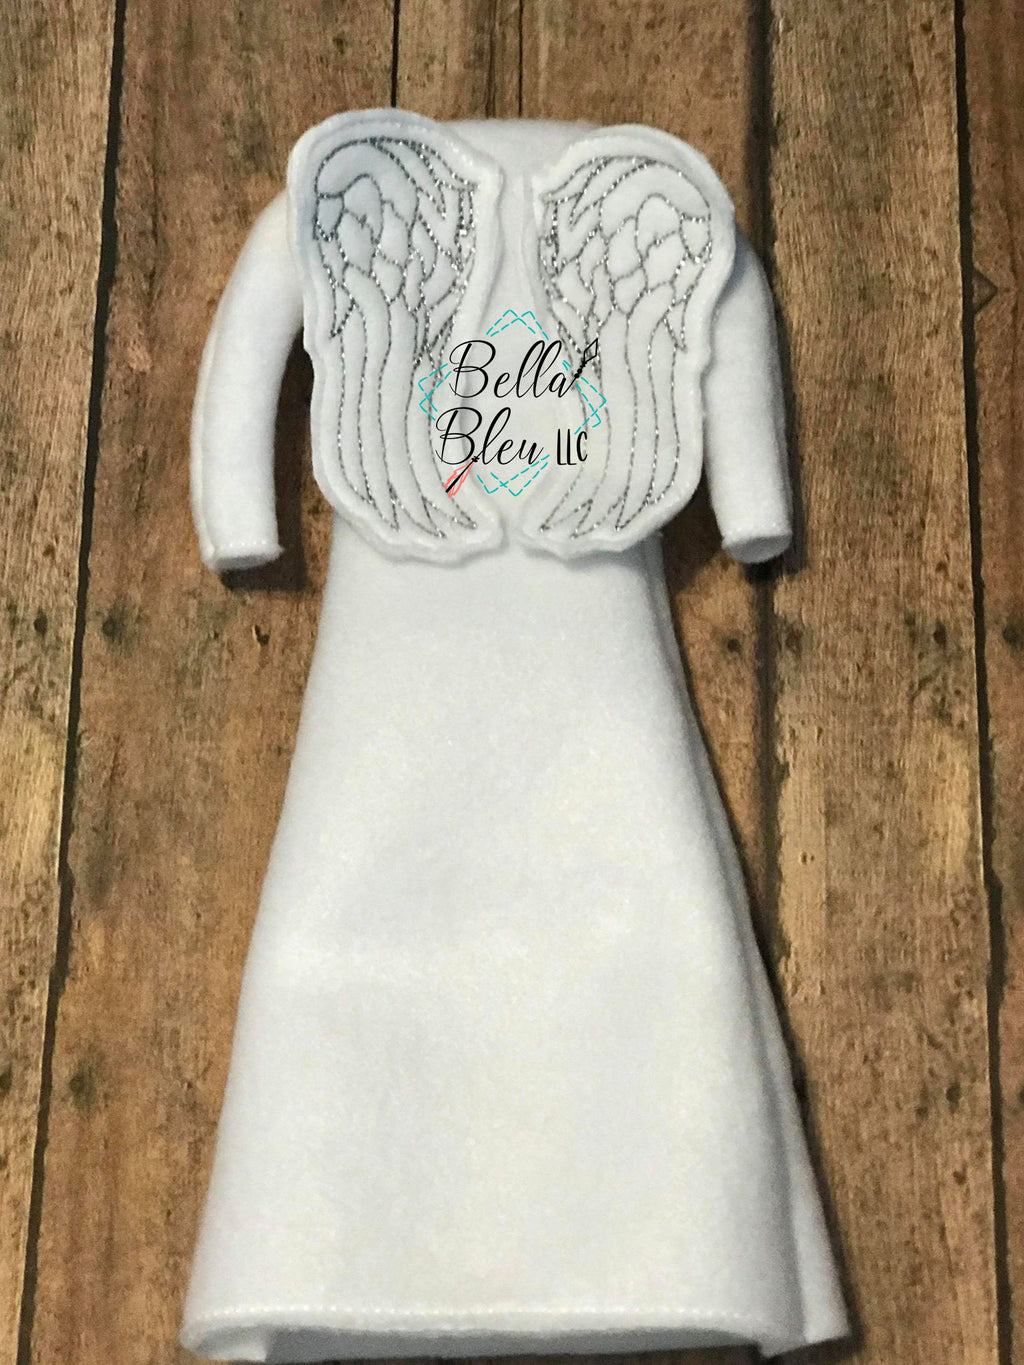 BBE - ITH Elf "Angel costume with wings" shirt sweater dress